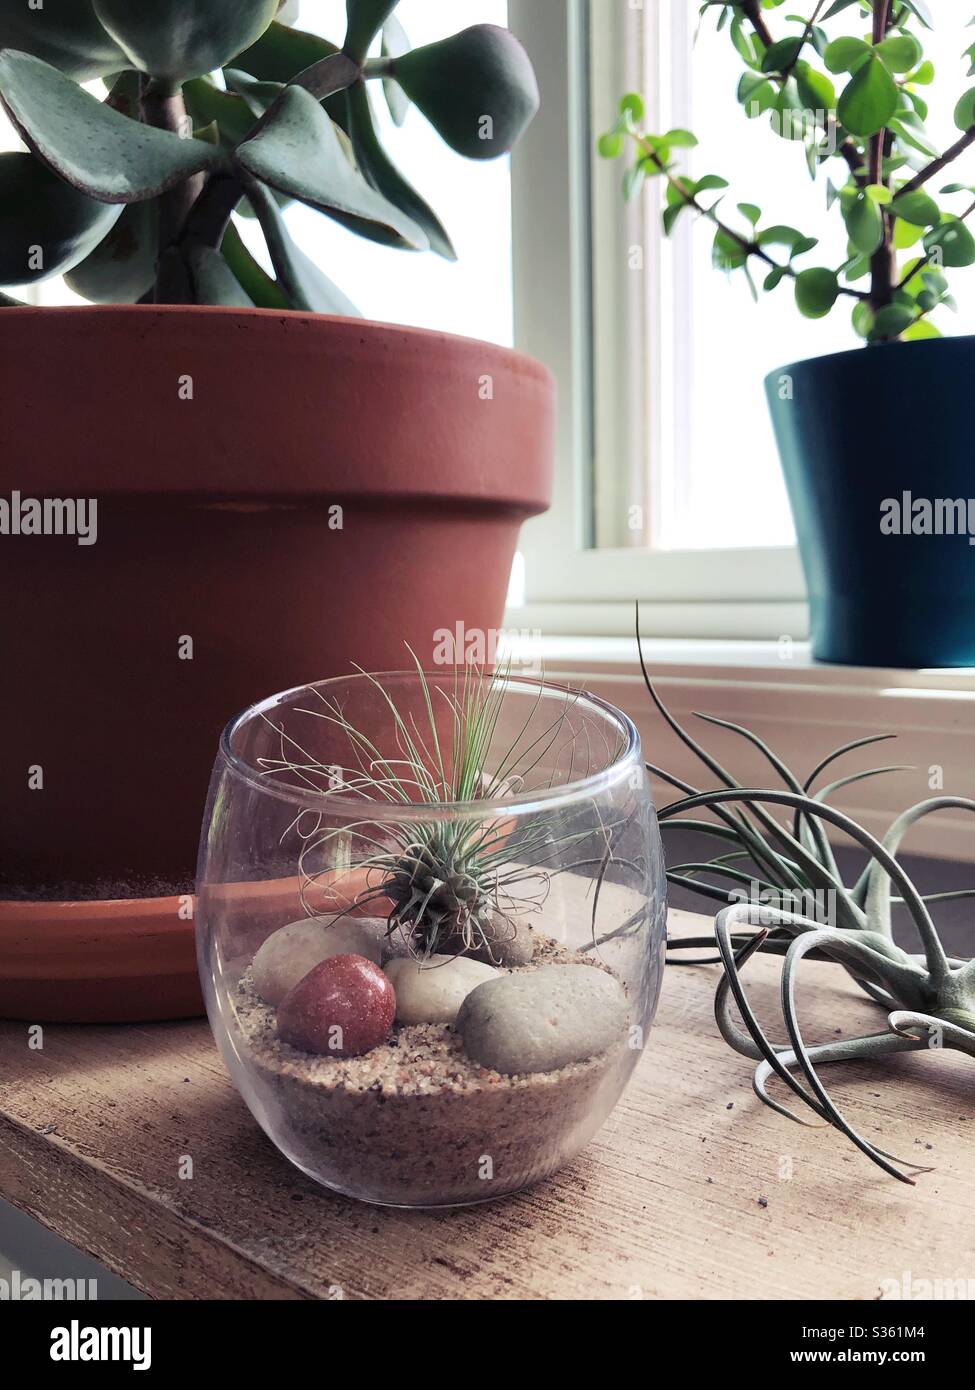 Air plants and succulents. Stock Photo